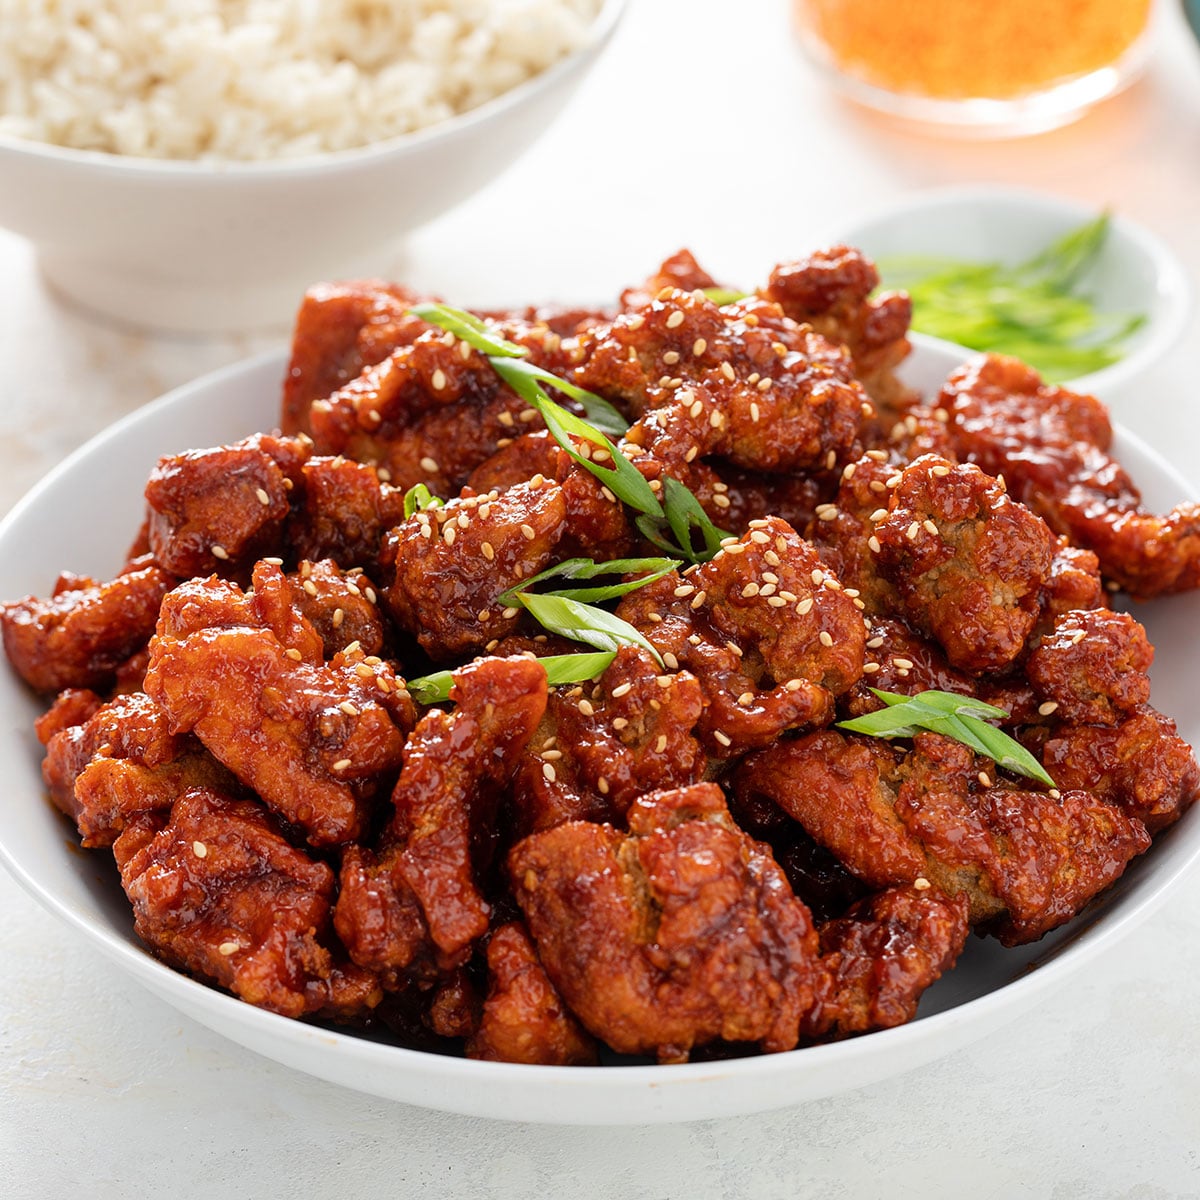 Korean Fried Chicken Mix (with Basic Ingredients) - That Cute Dish!